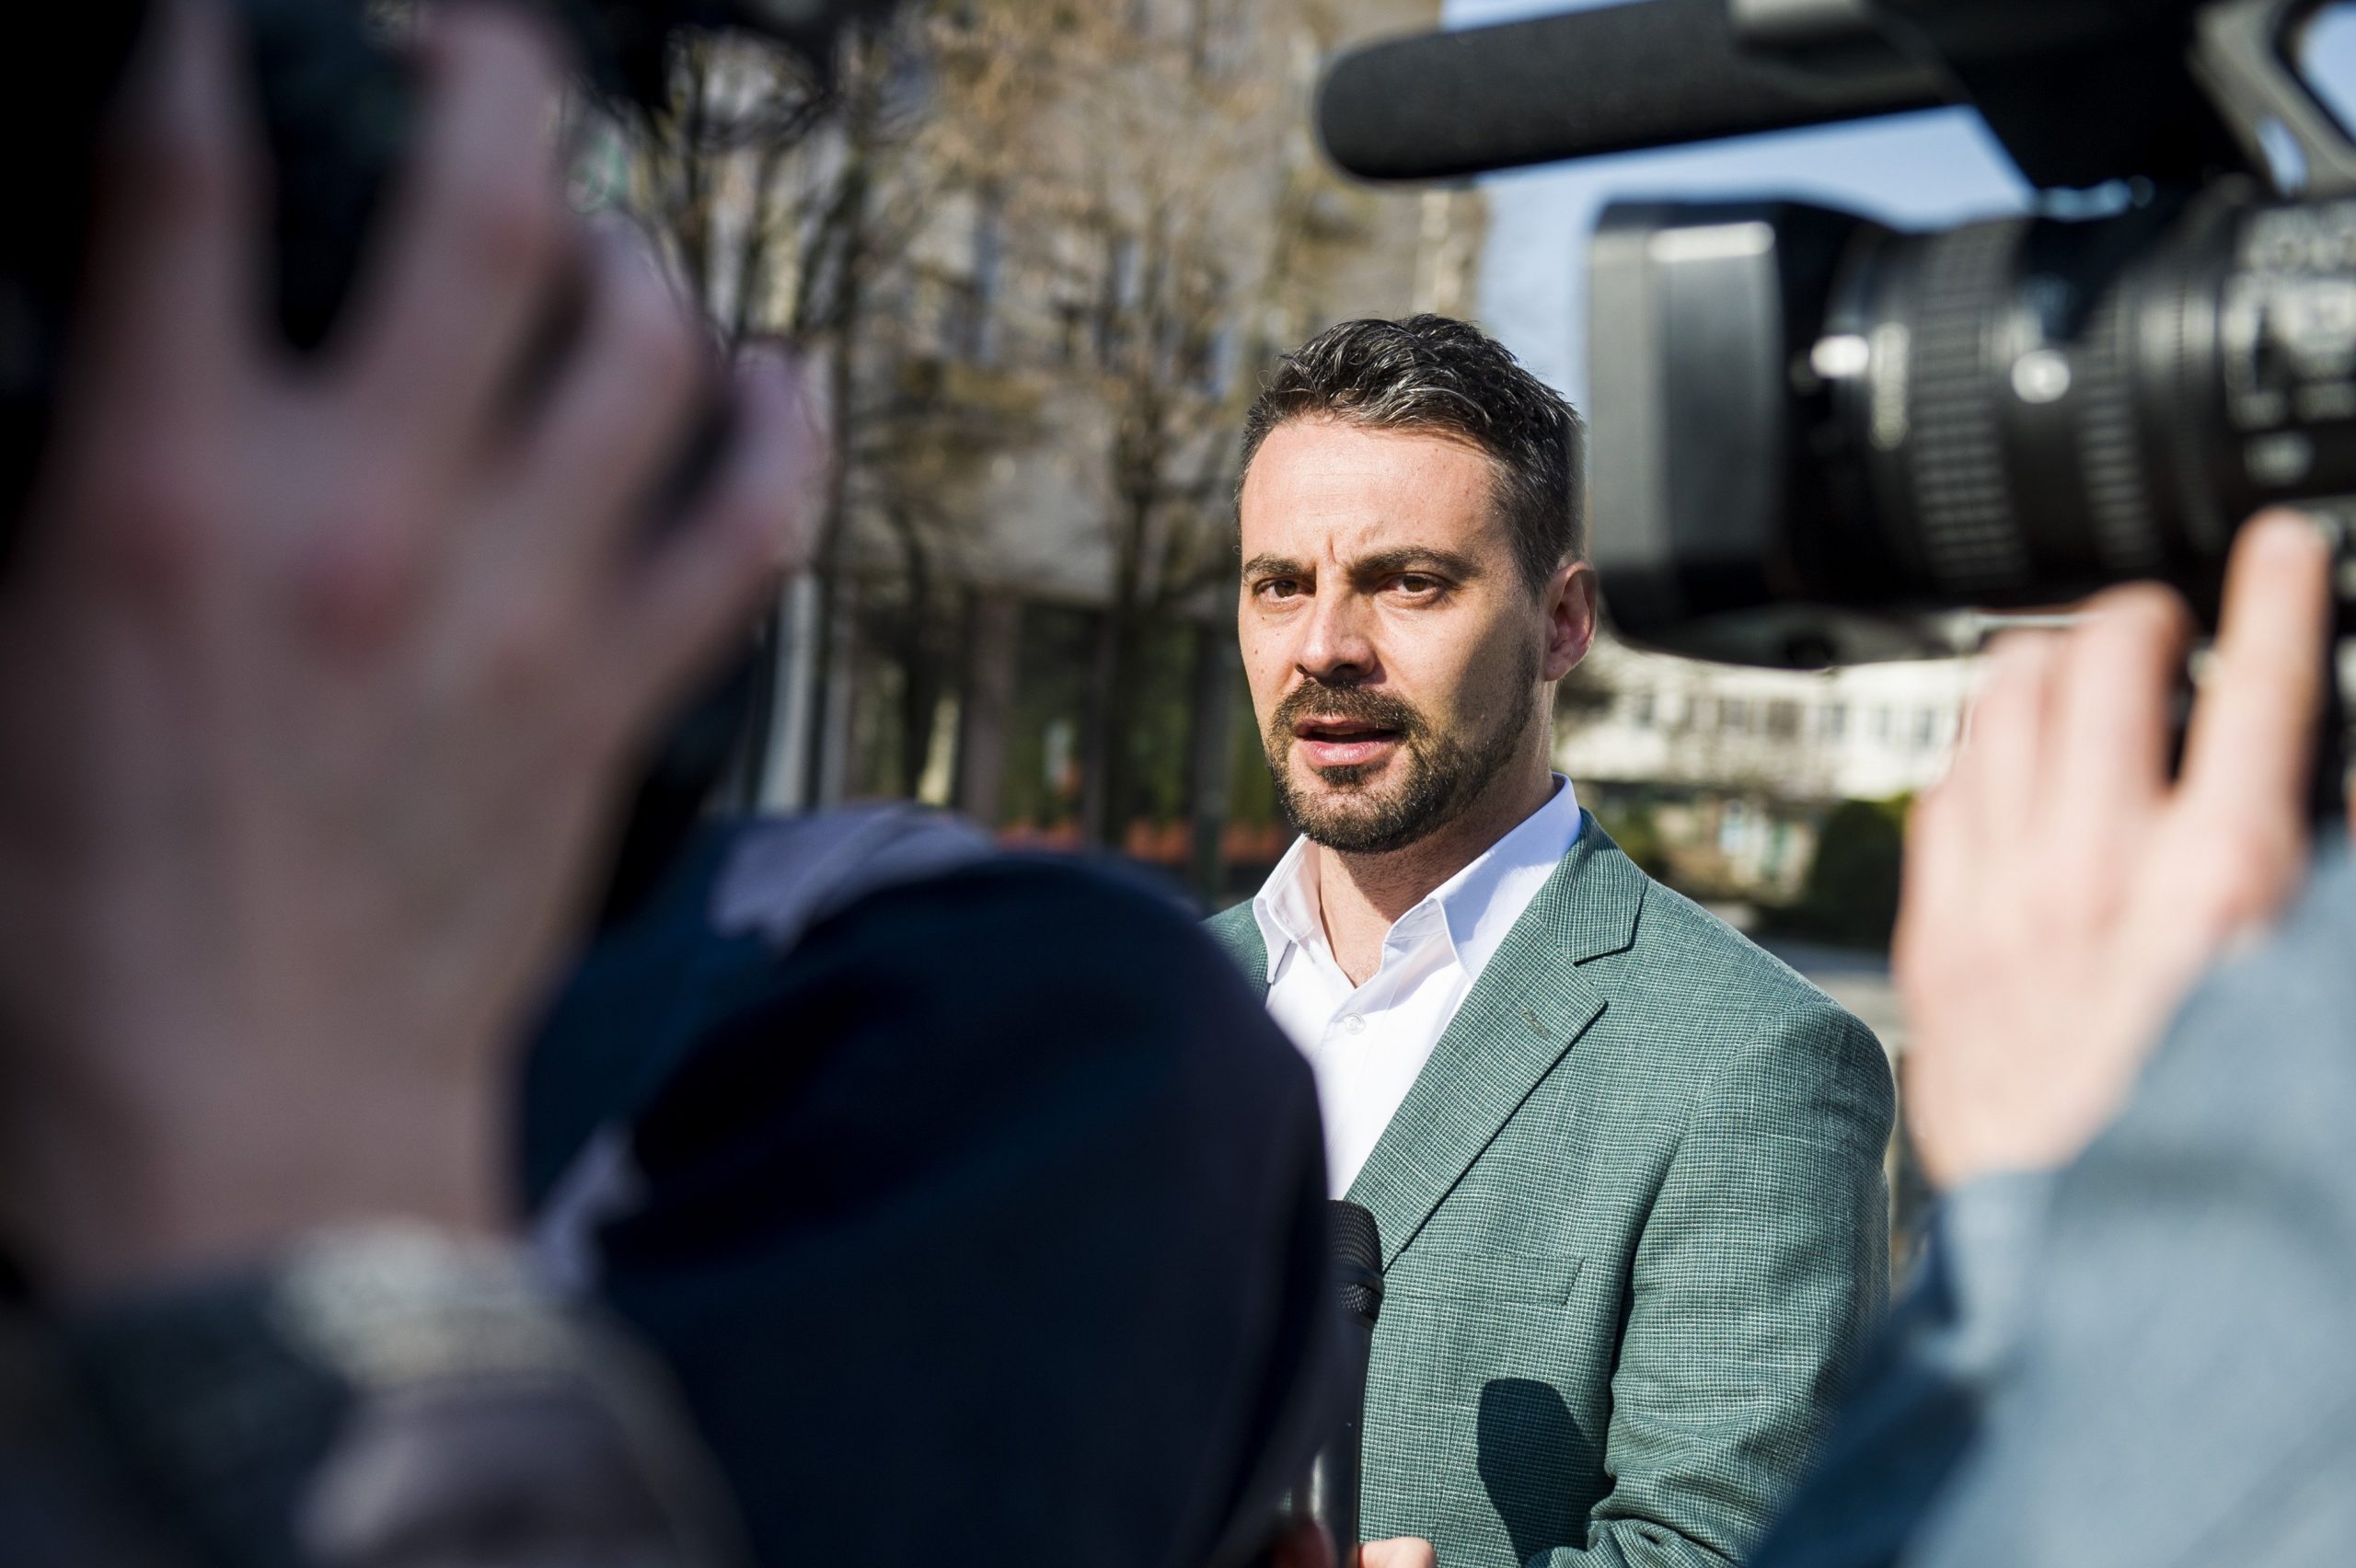 Online Referendum on Voting Abilities of Hungarians Working Abroad to be Launched by Former Jobbik Leader Vona